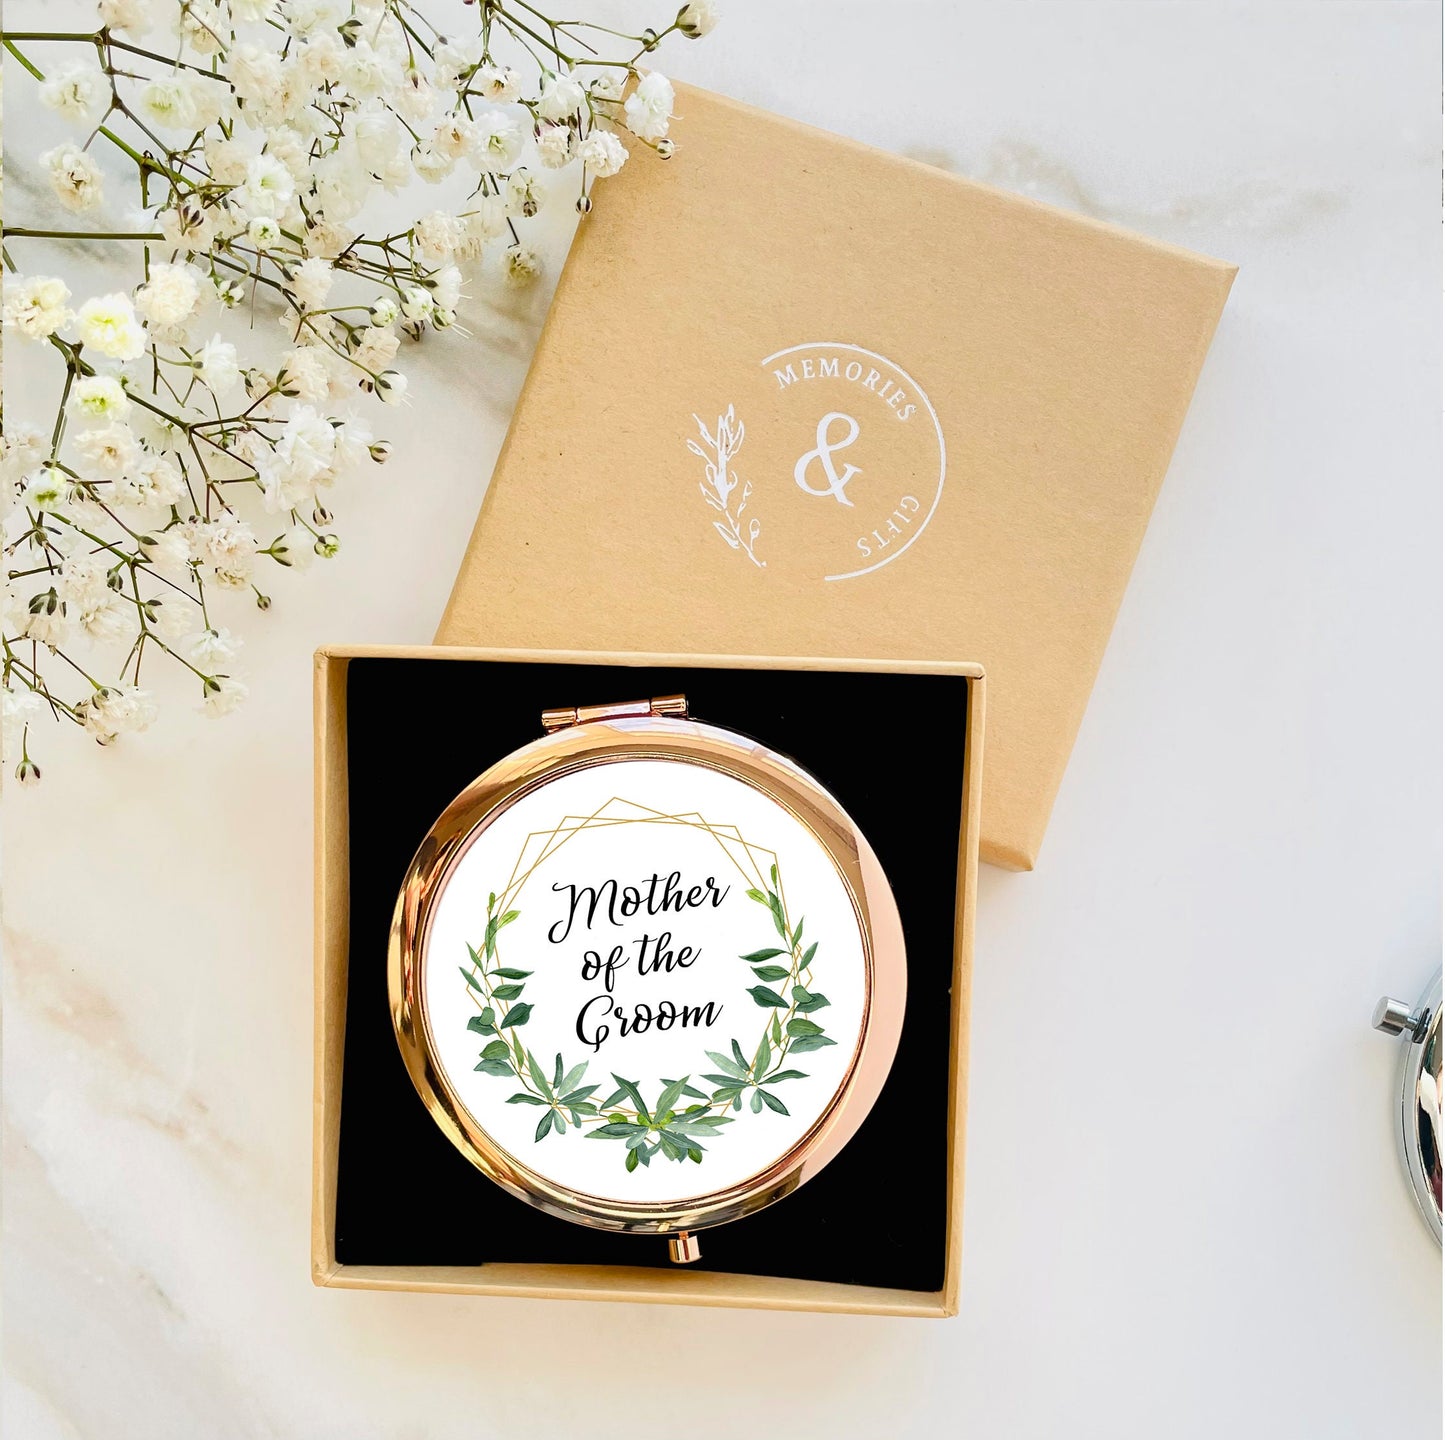 Mother of the Groom Compact Mirror - Greenery